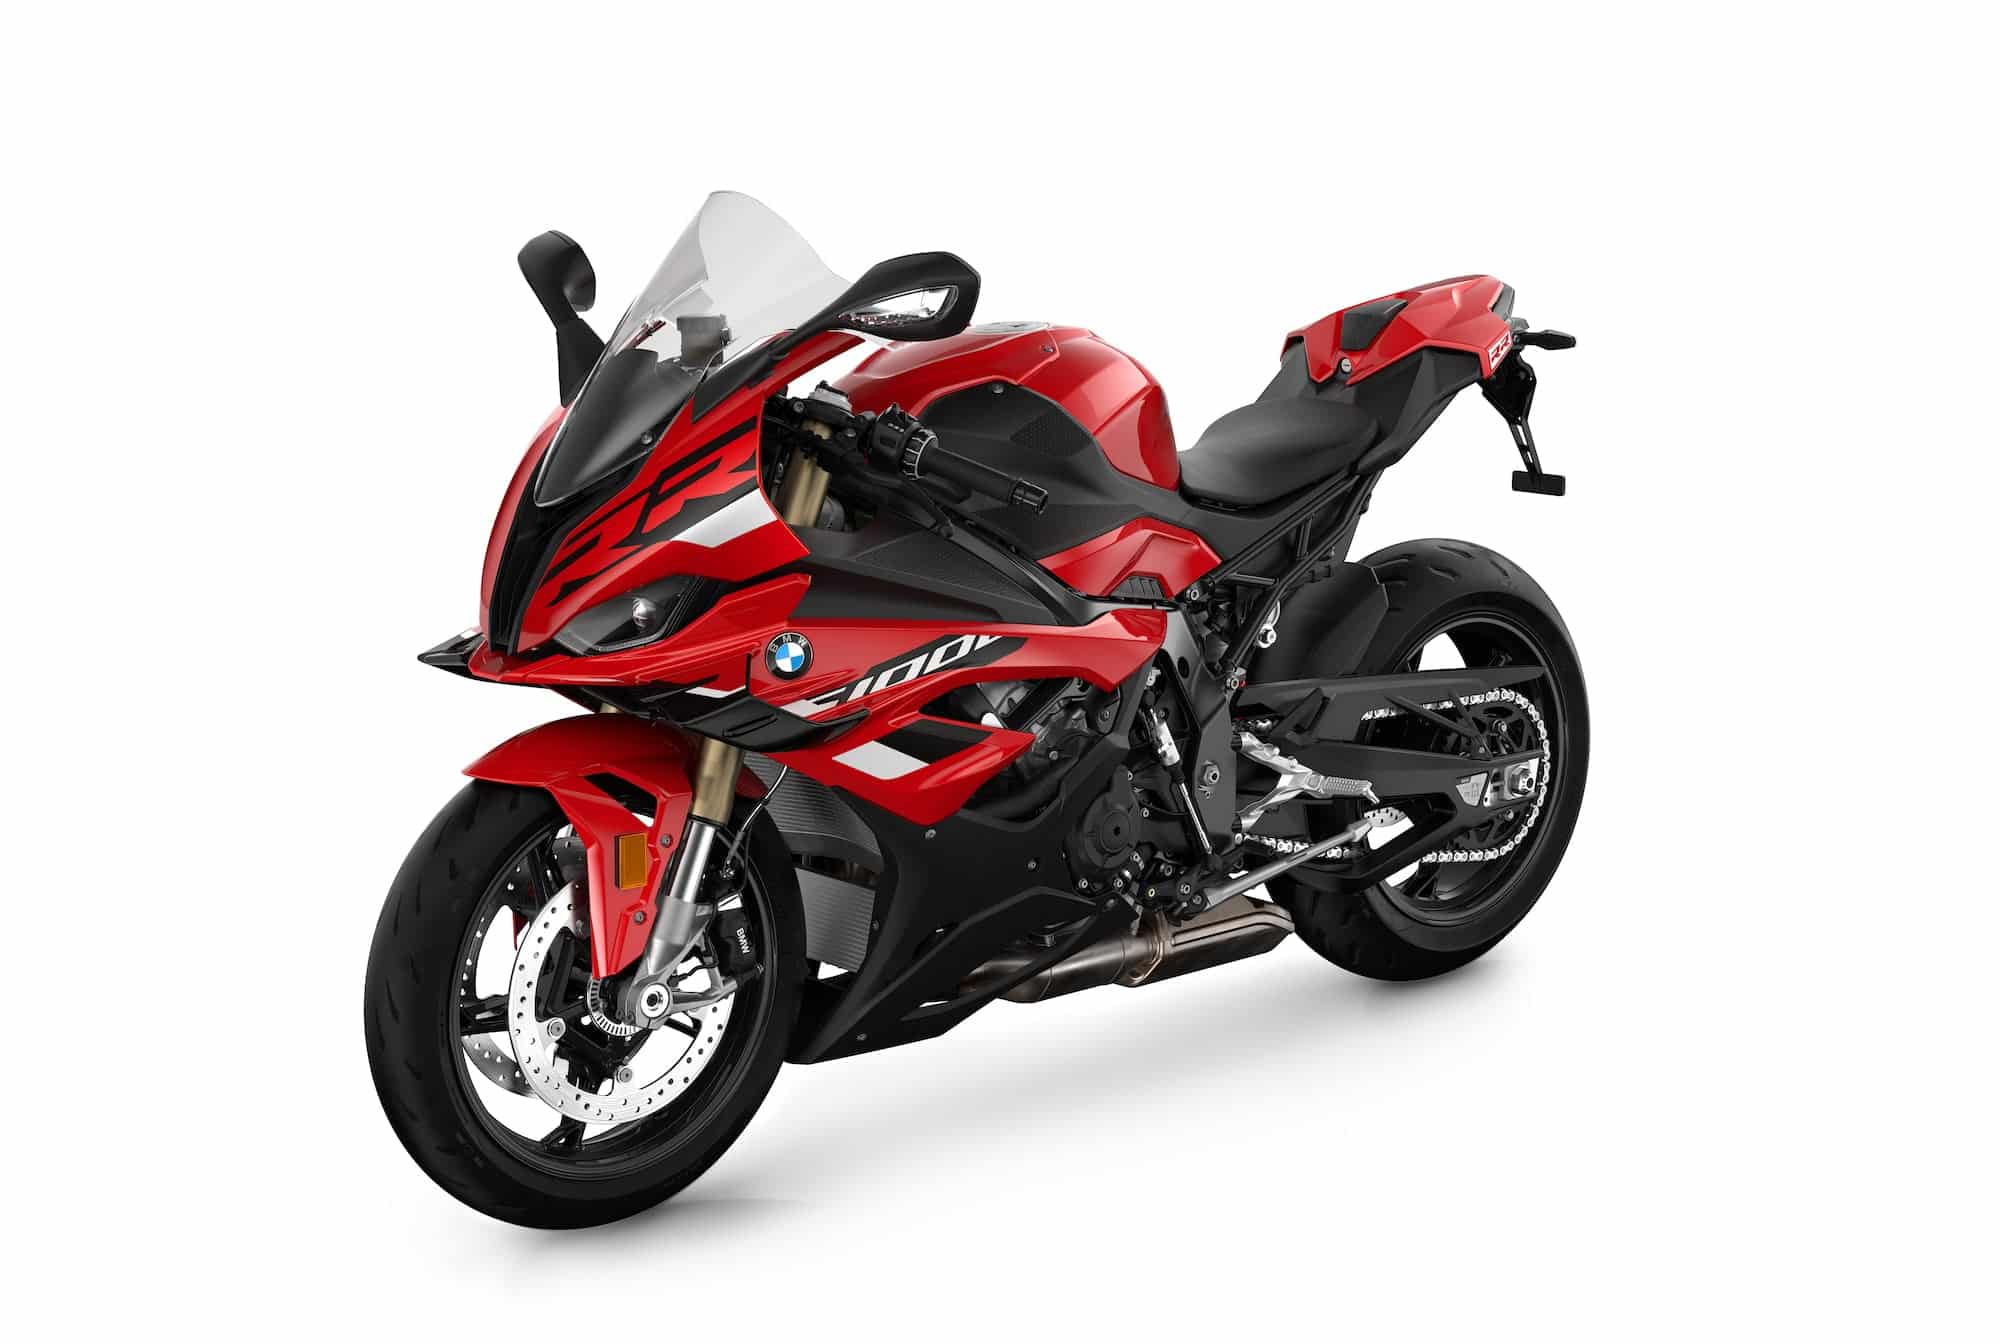 2023 BMW S 1000 RR LHS 3-4 Passion in Racing Red studio